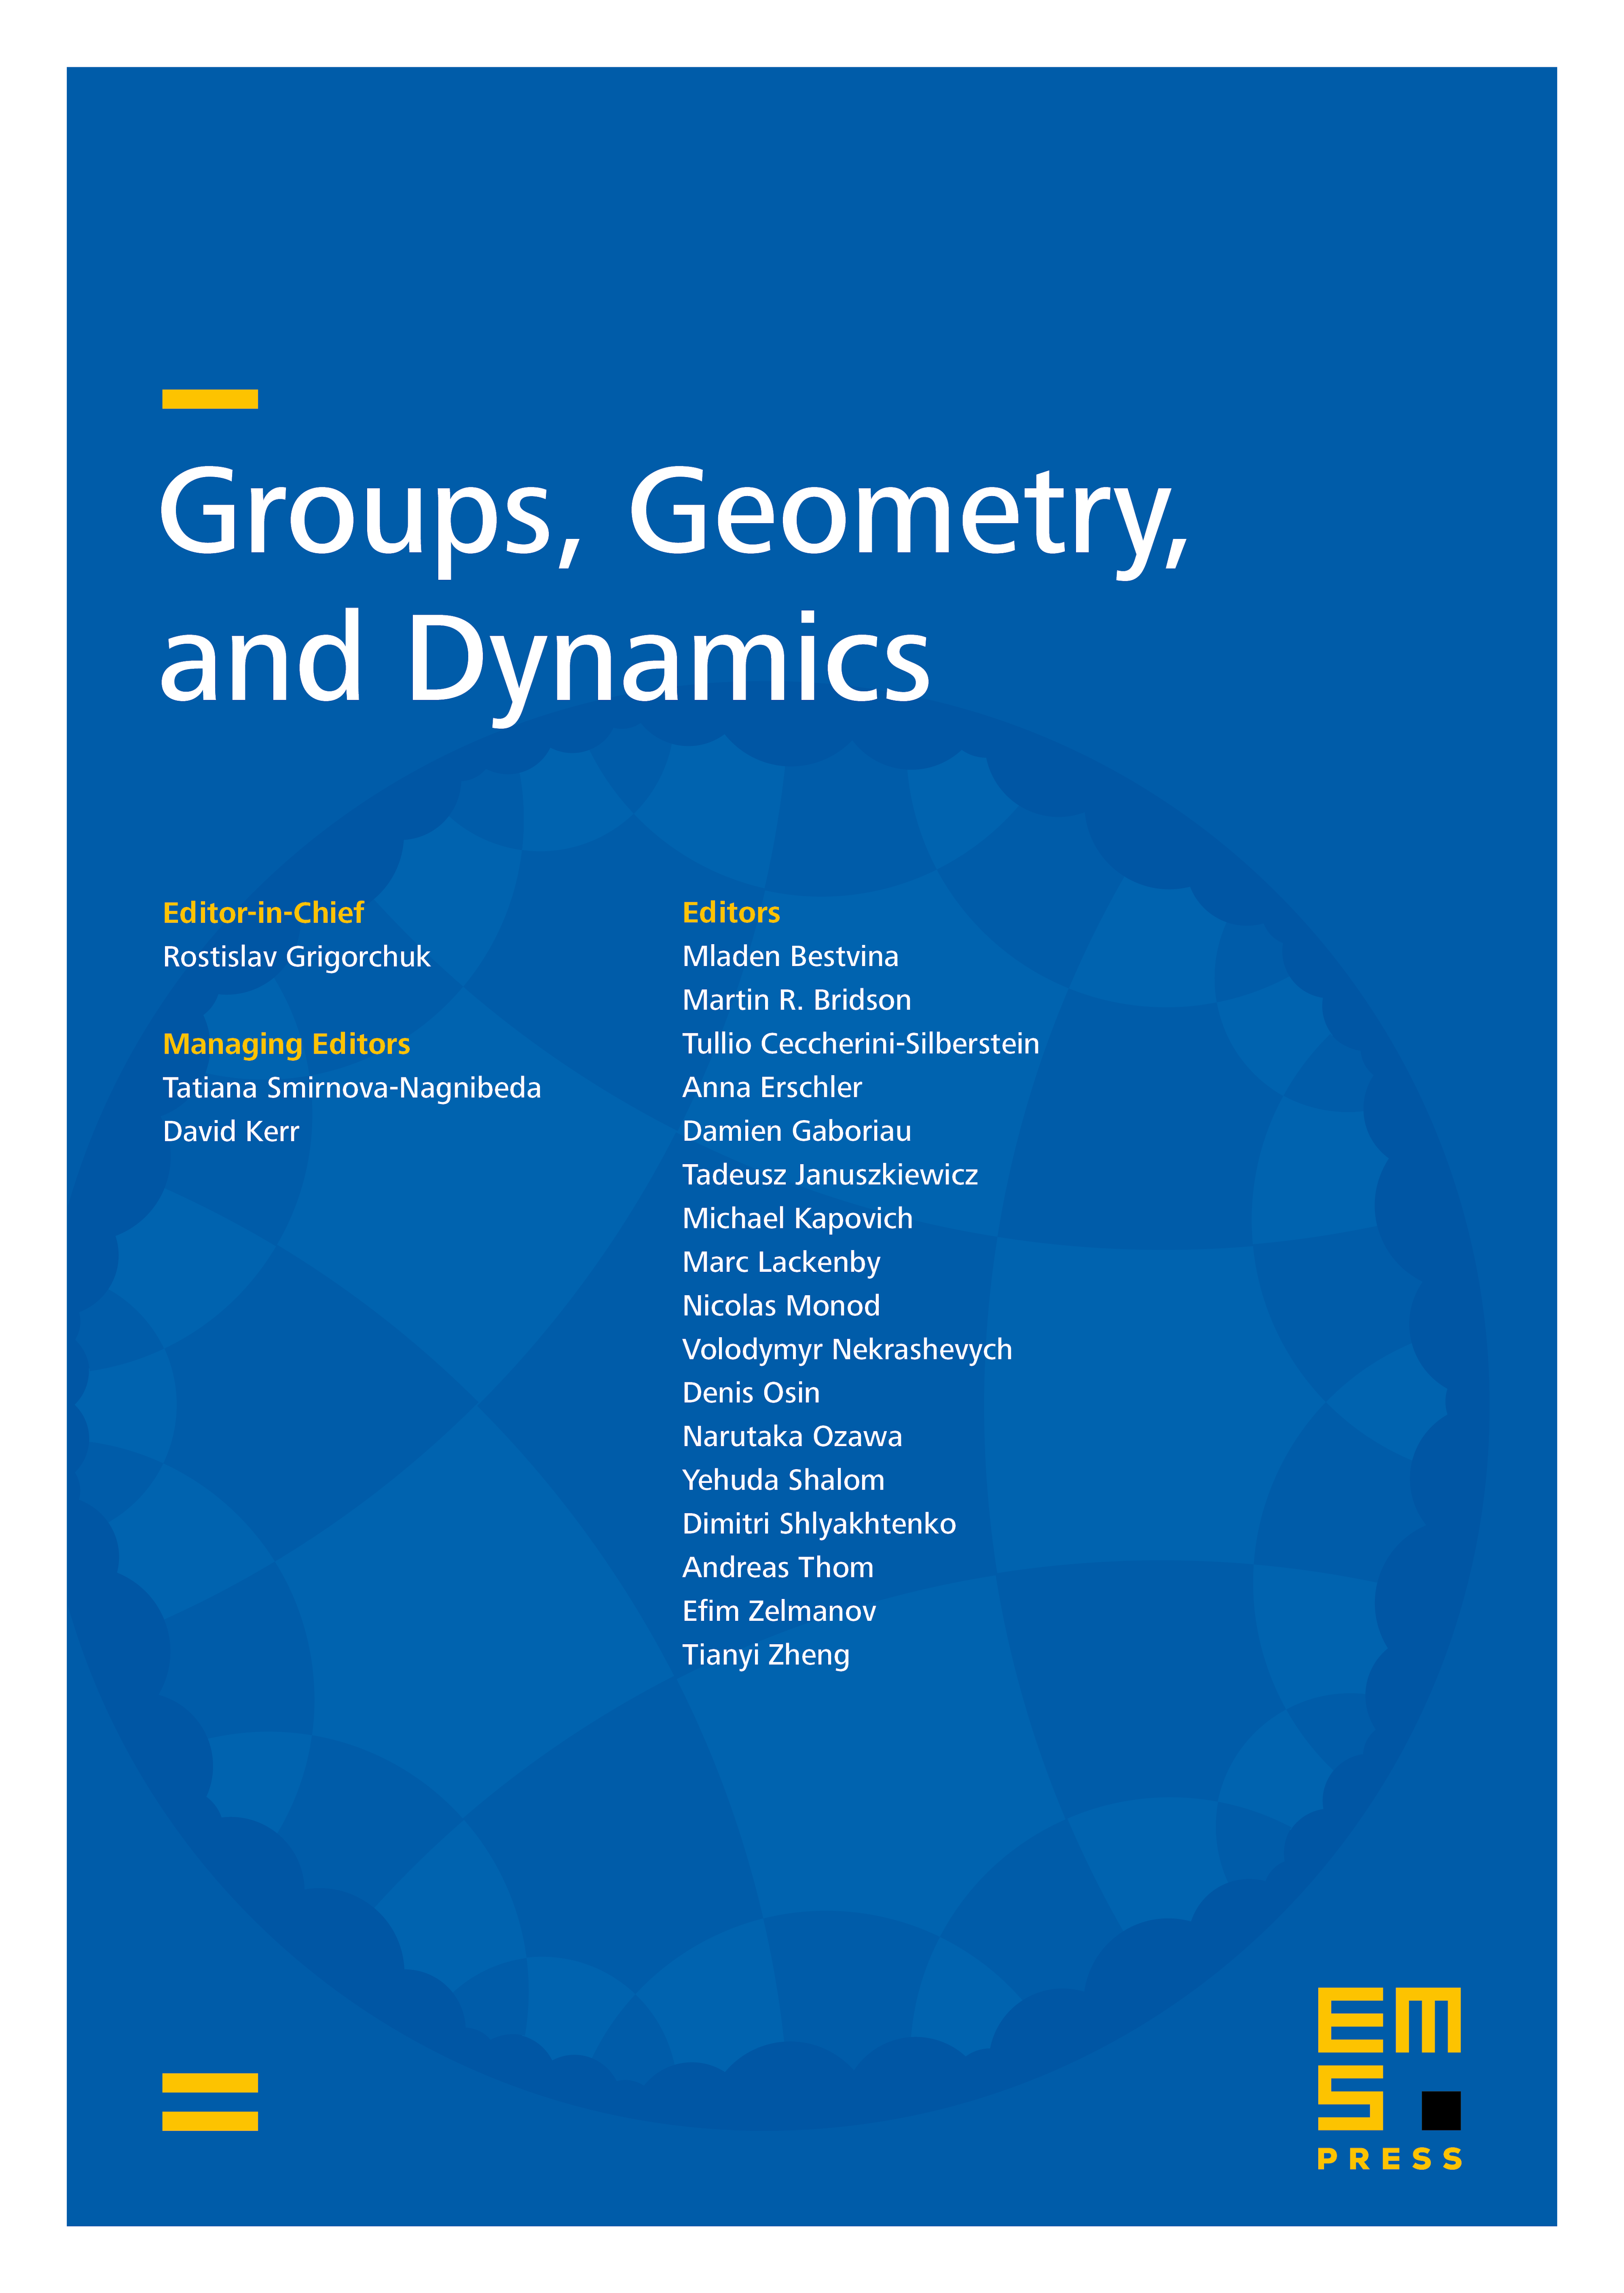 Sigma invariants of direct products of groups cover